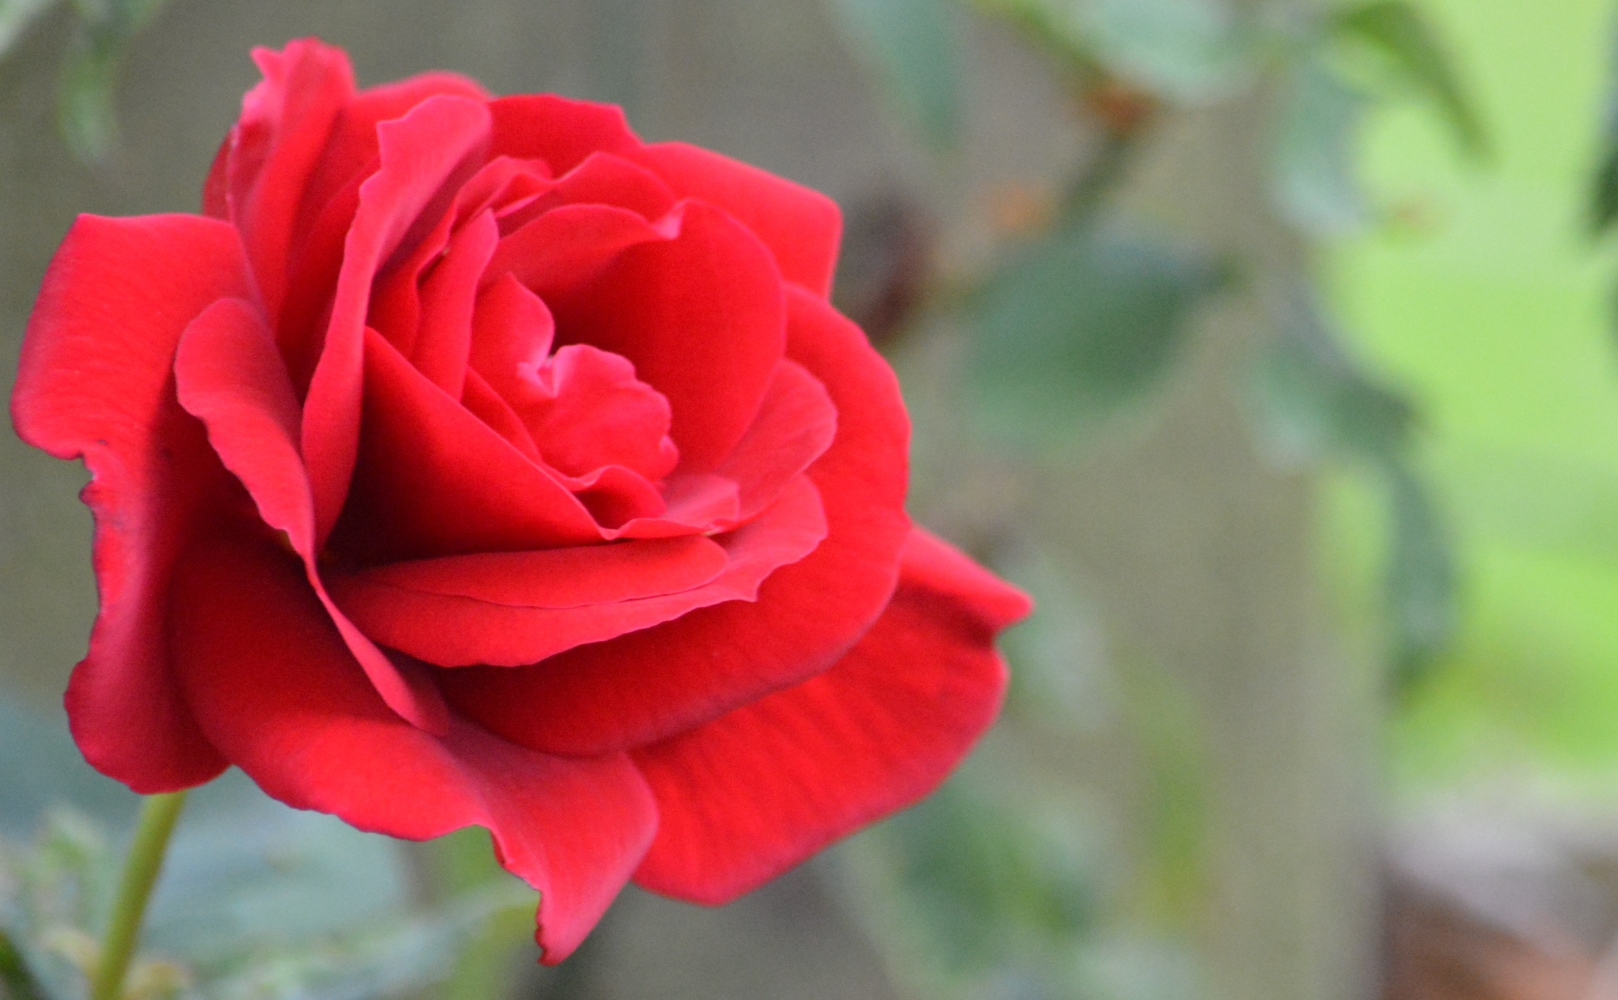 A bright red rose